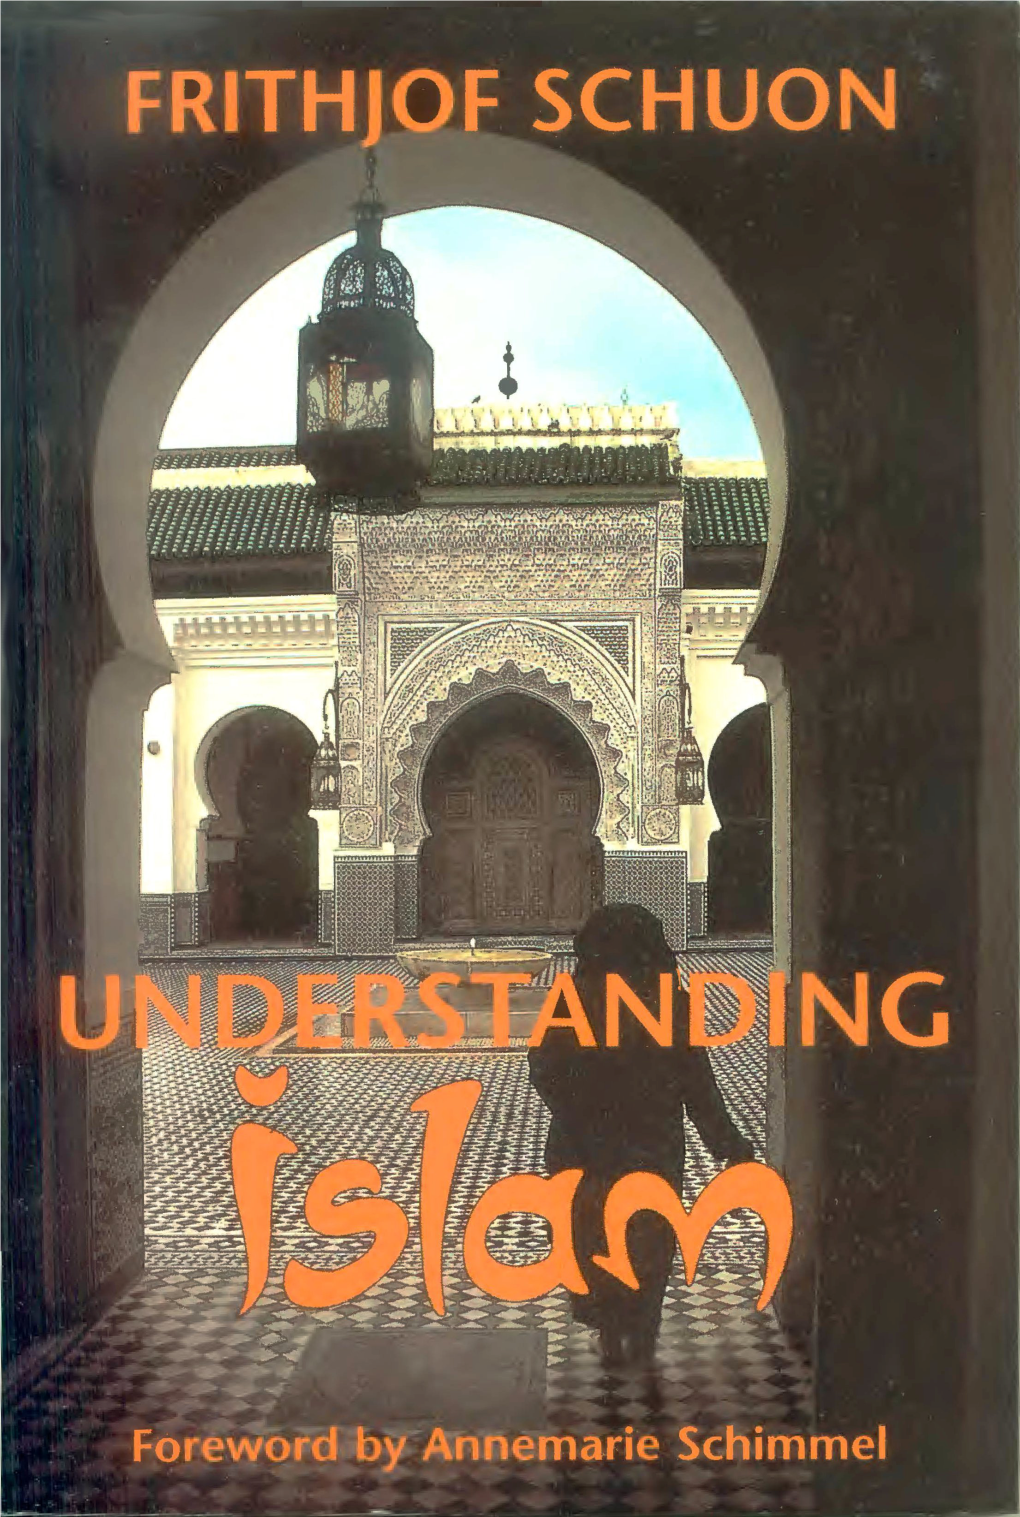 Understanding Islam I by Frithjof Schuon; with a Foreword by Annemarie Schimmel P.Cm